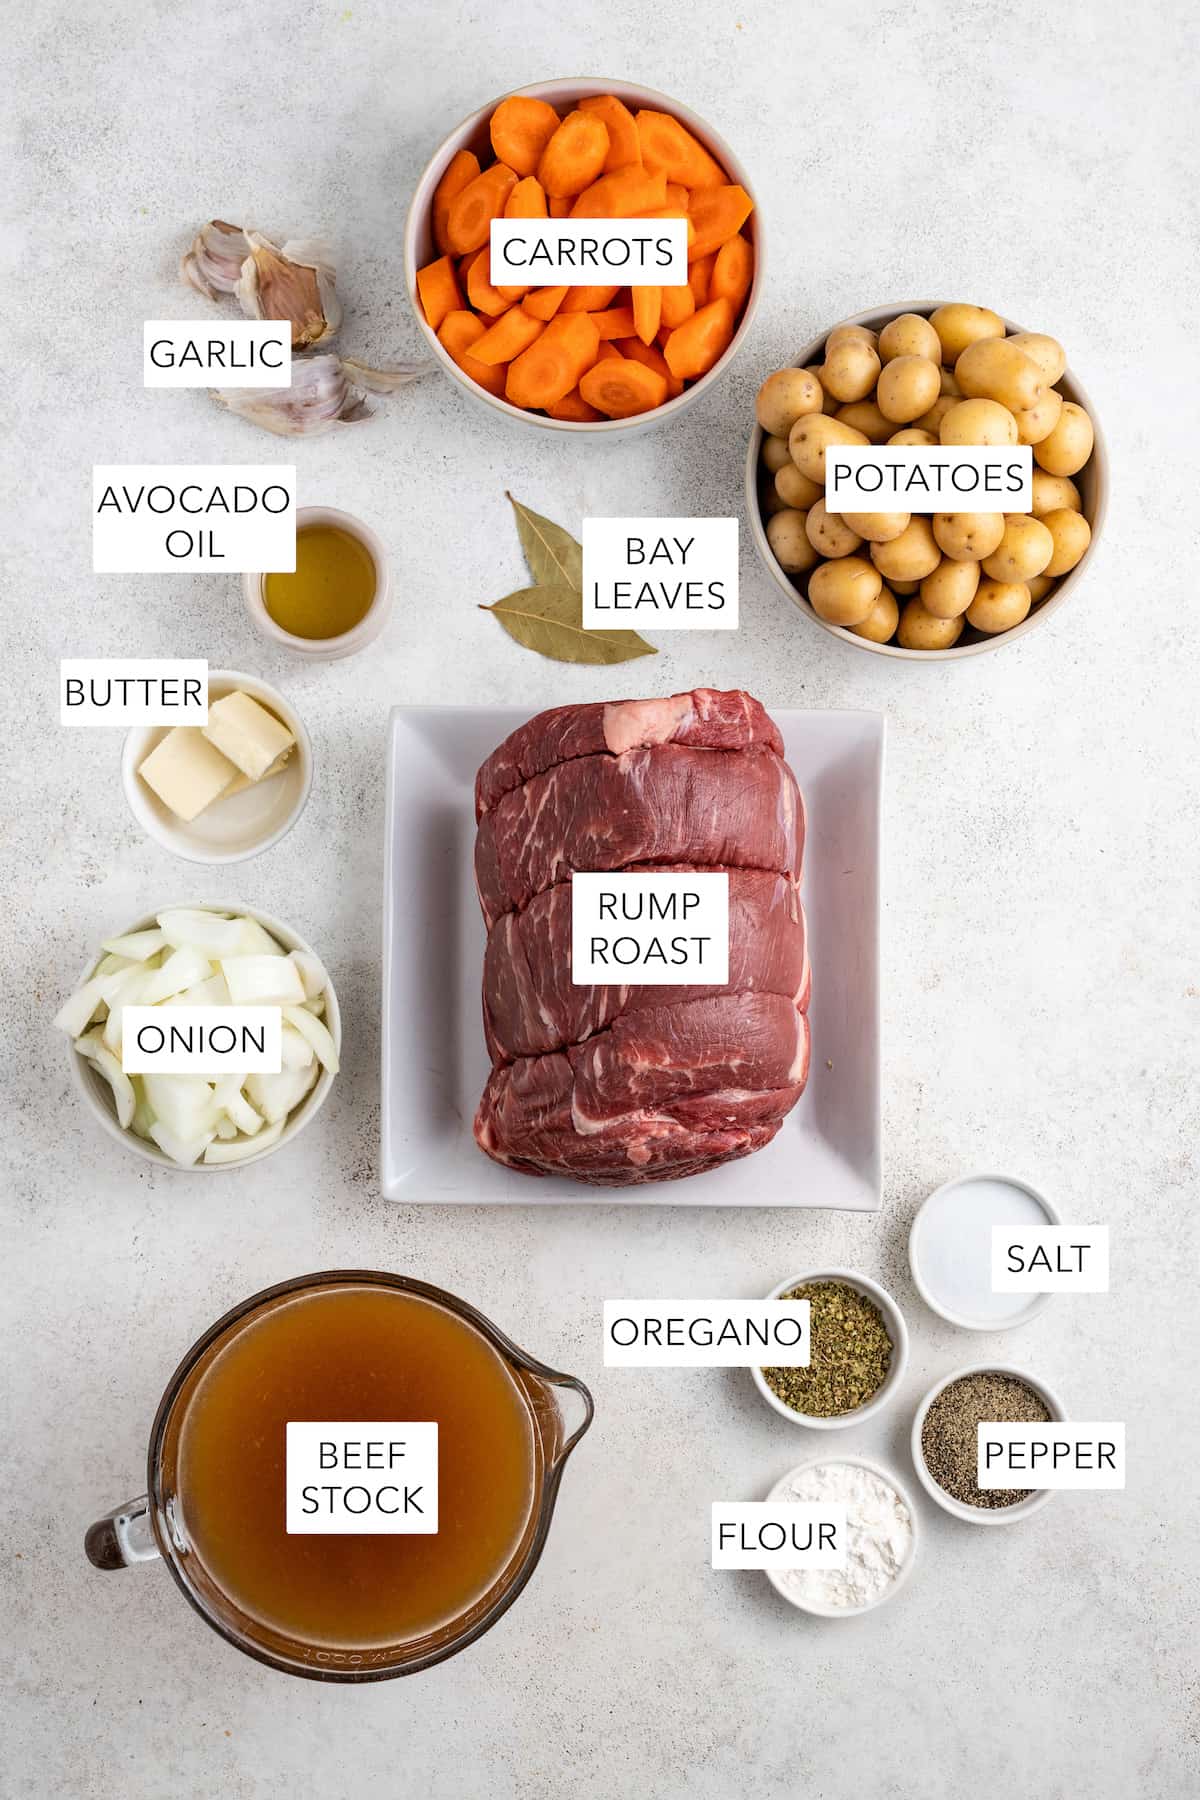 Ingredients for crock pot rump roast, labeled and separated.